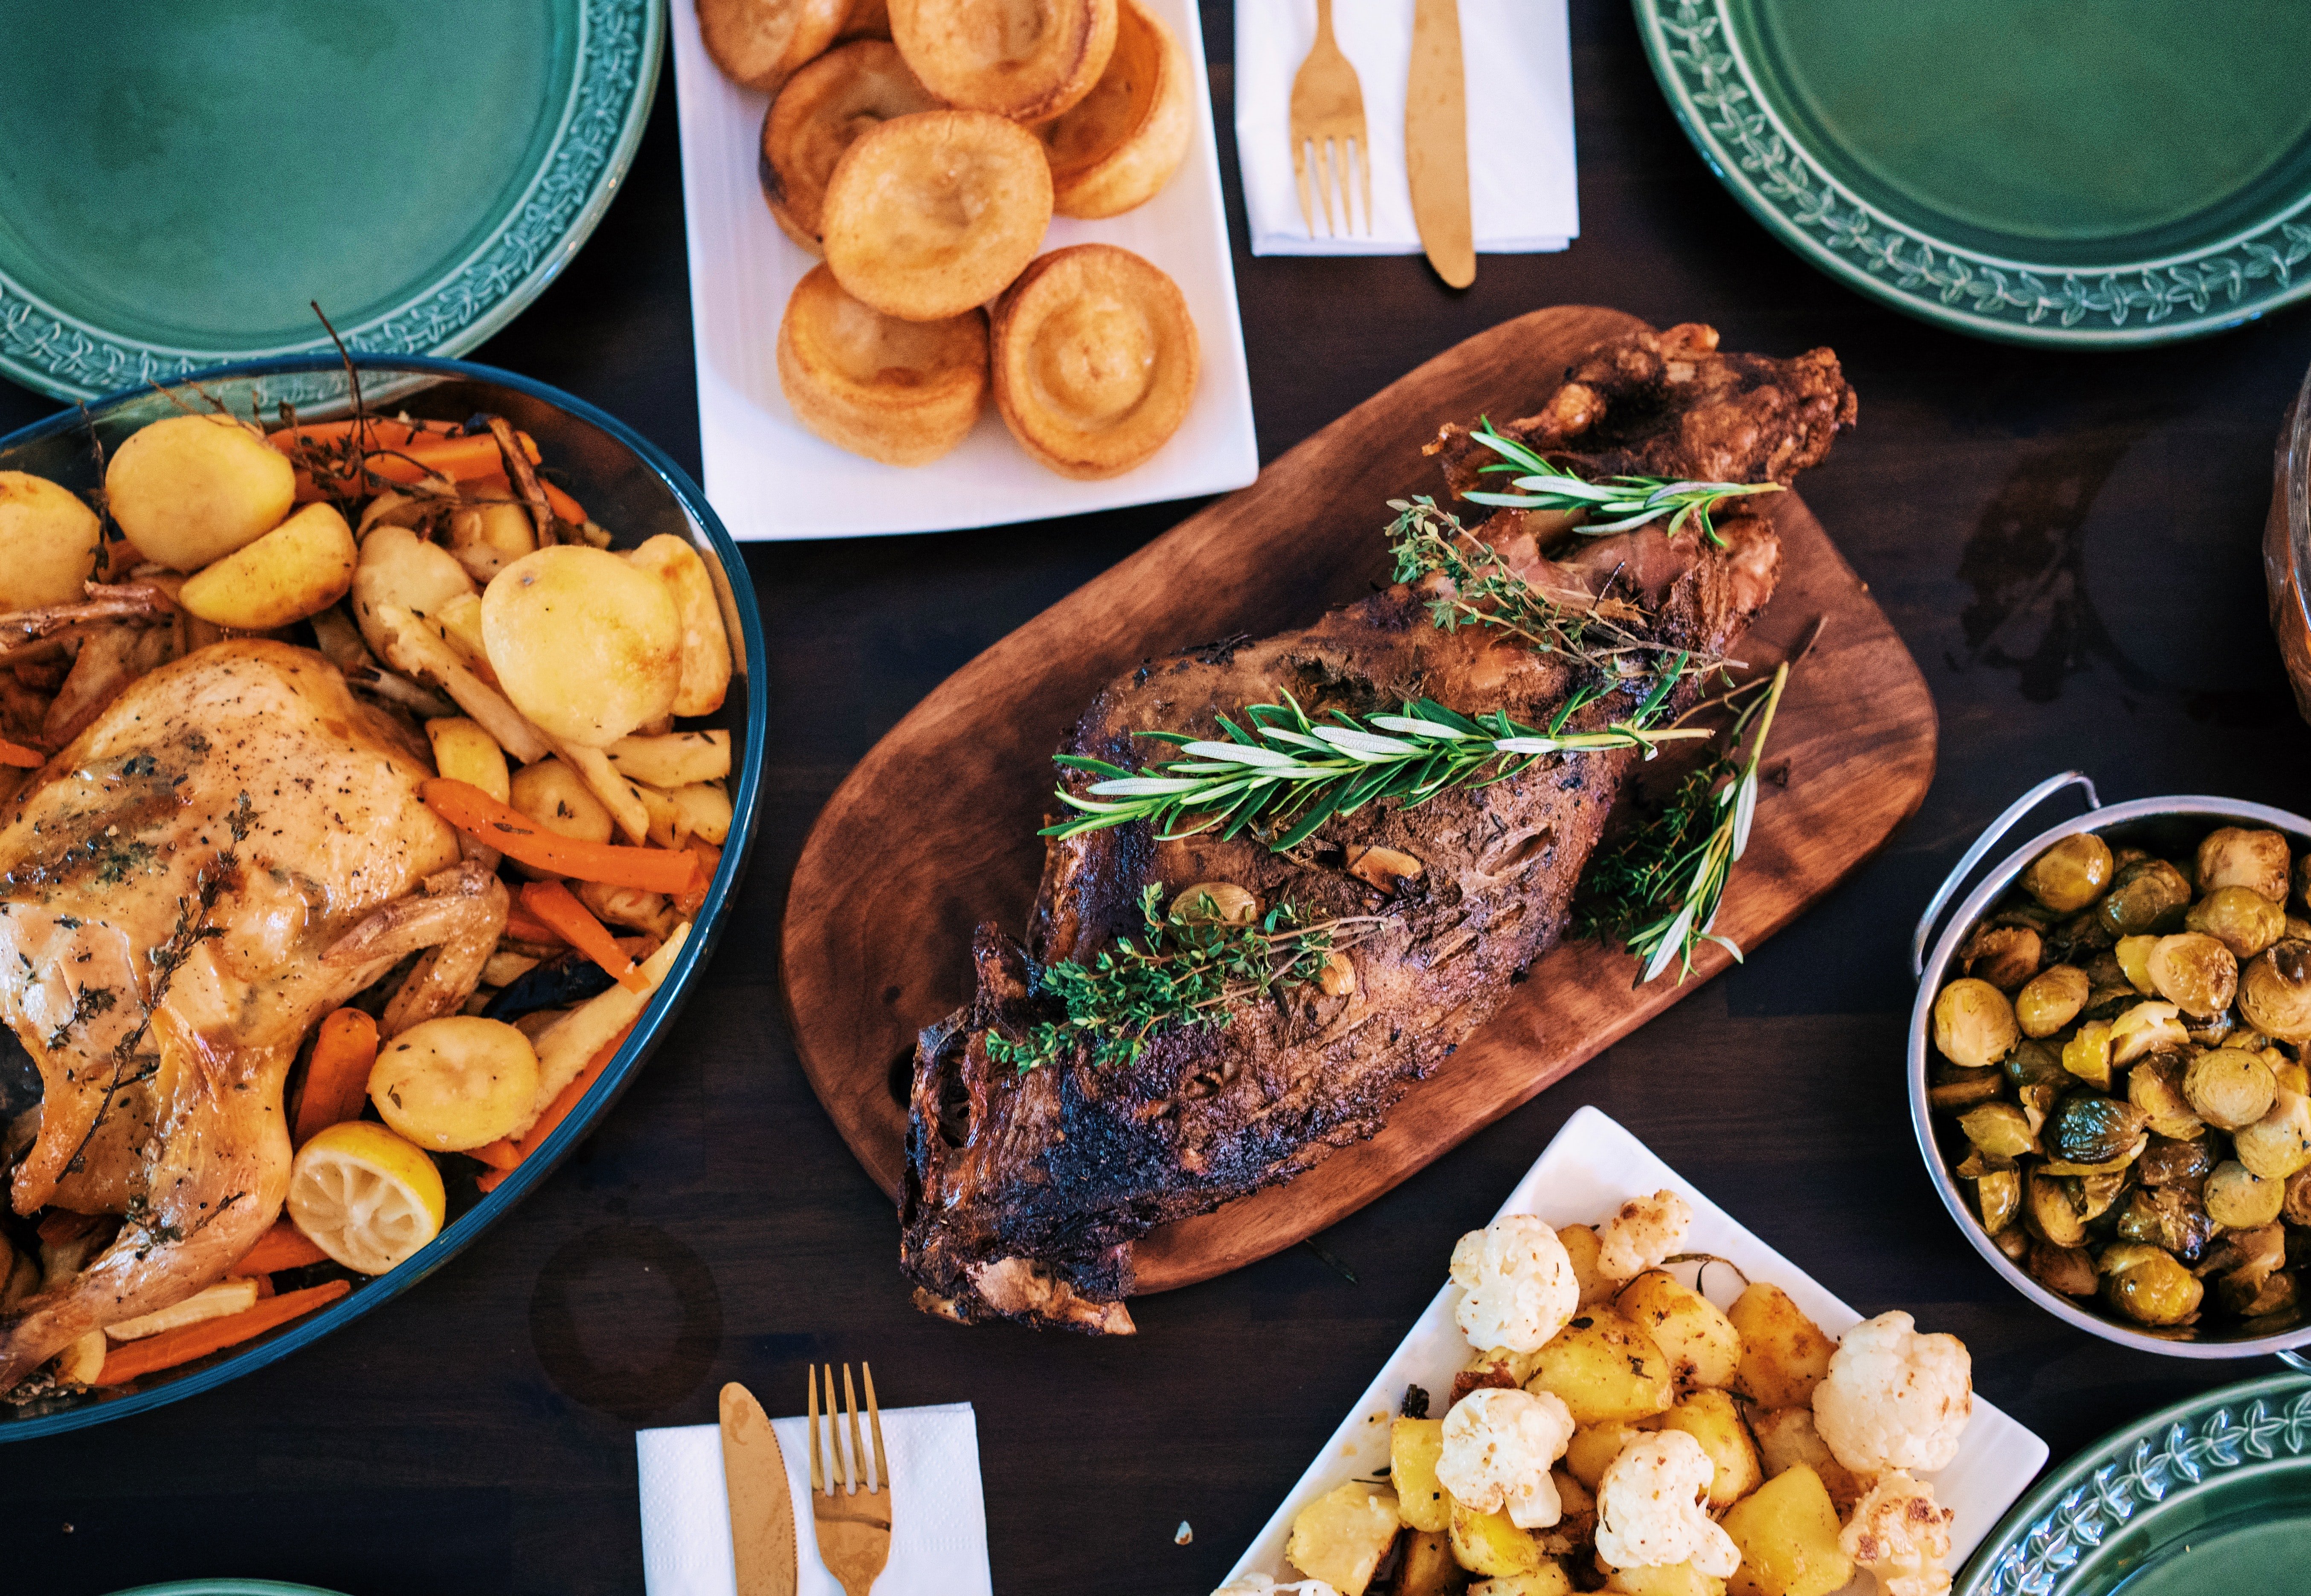 Gregory prepared Christmas dinner for Aaron and his parents | Photo: Unsplash